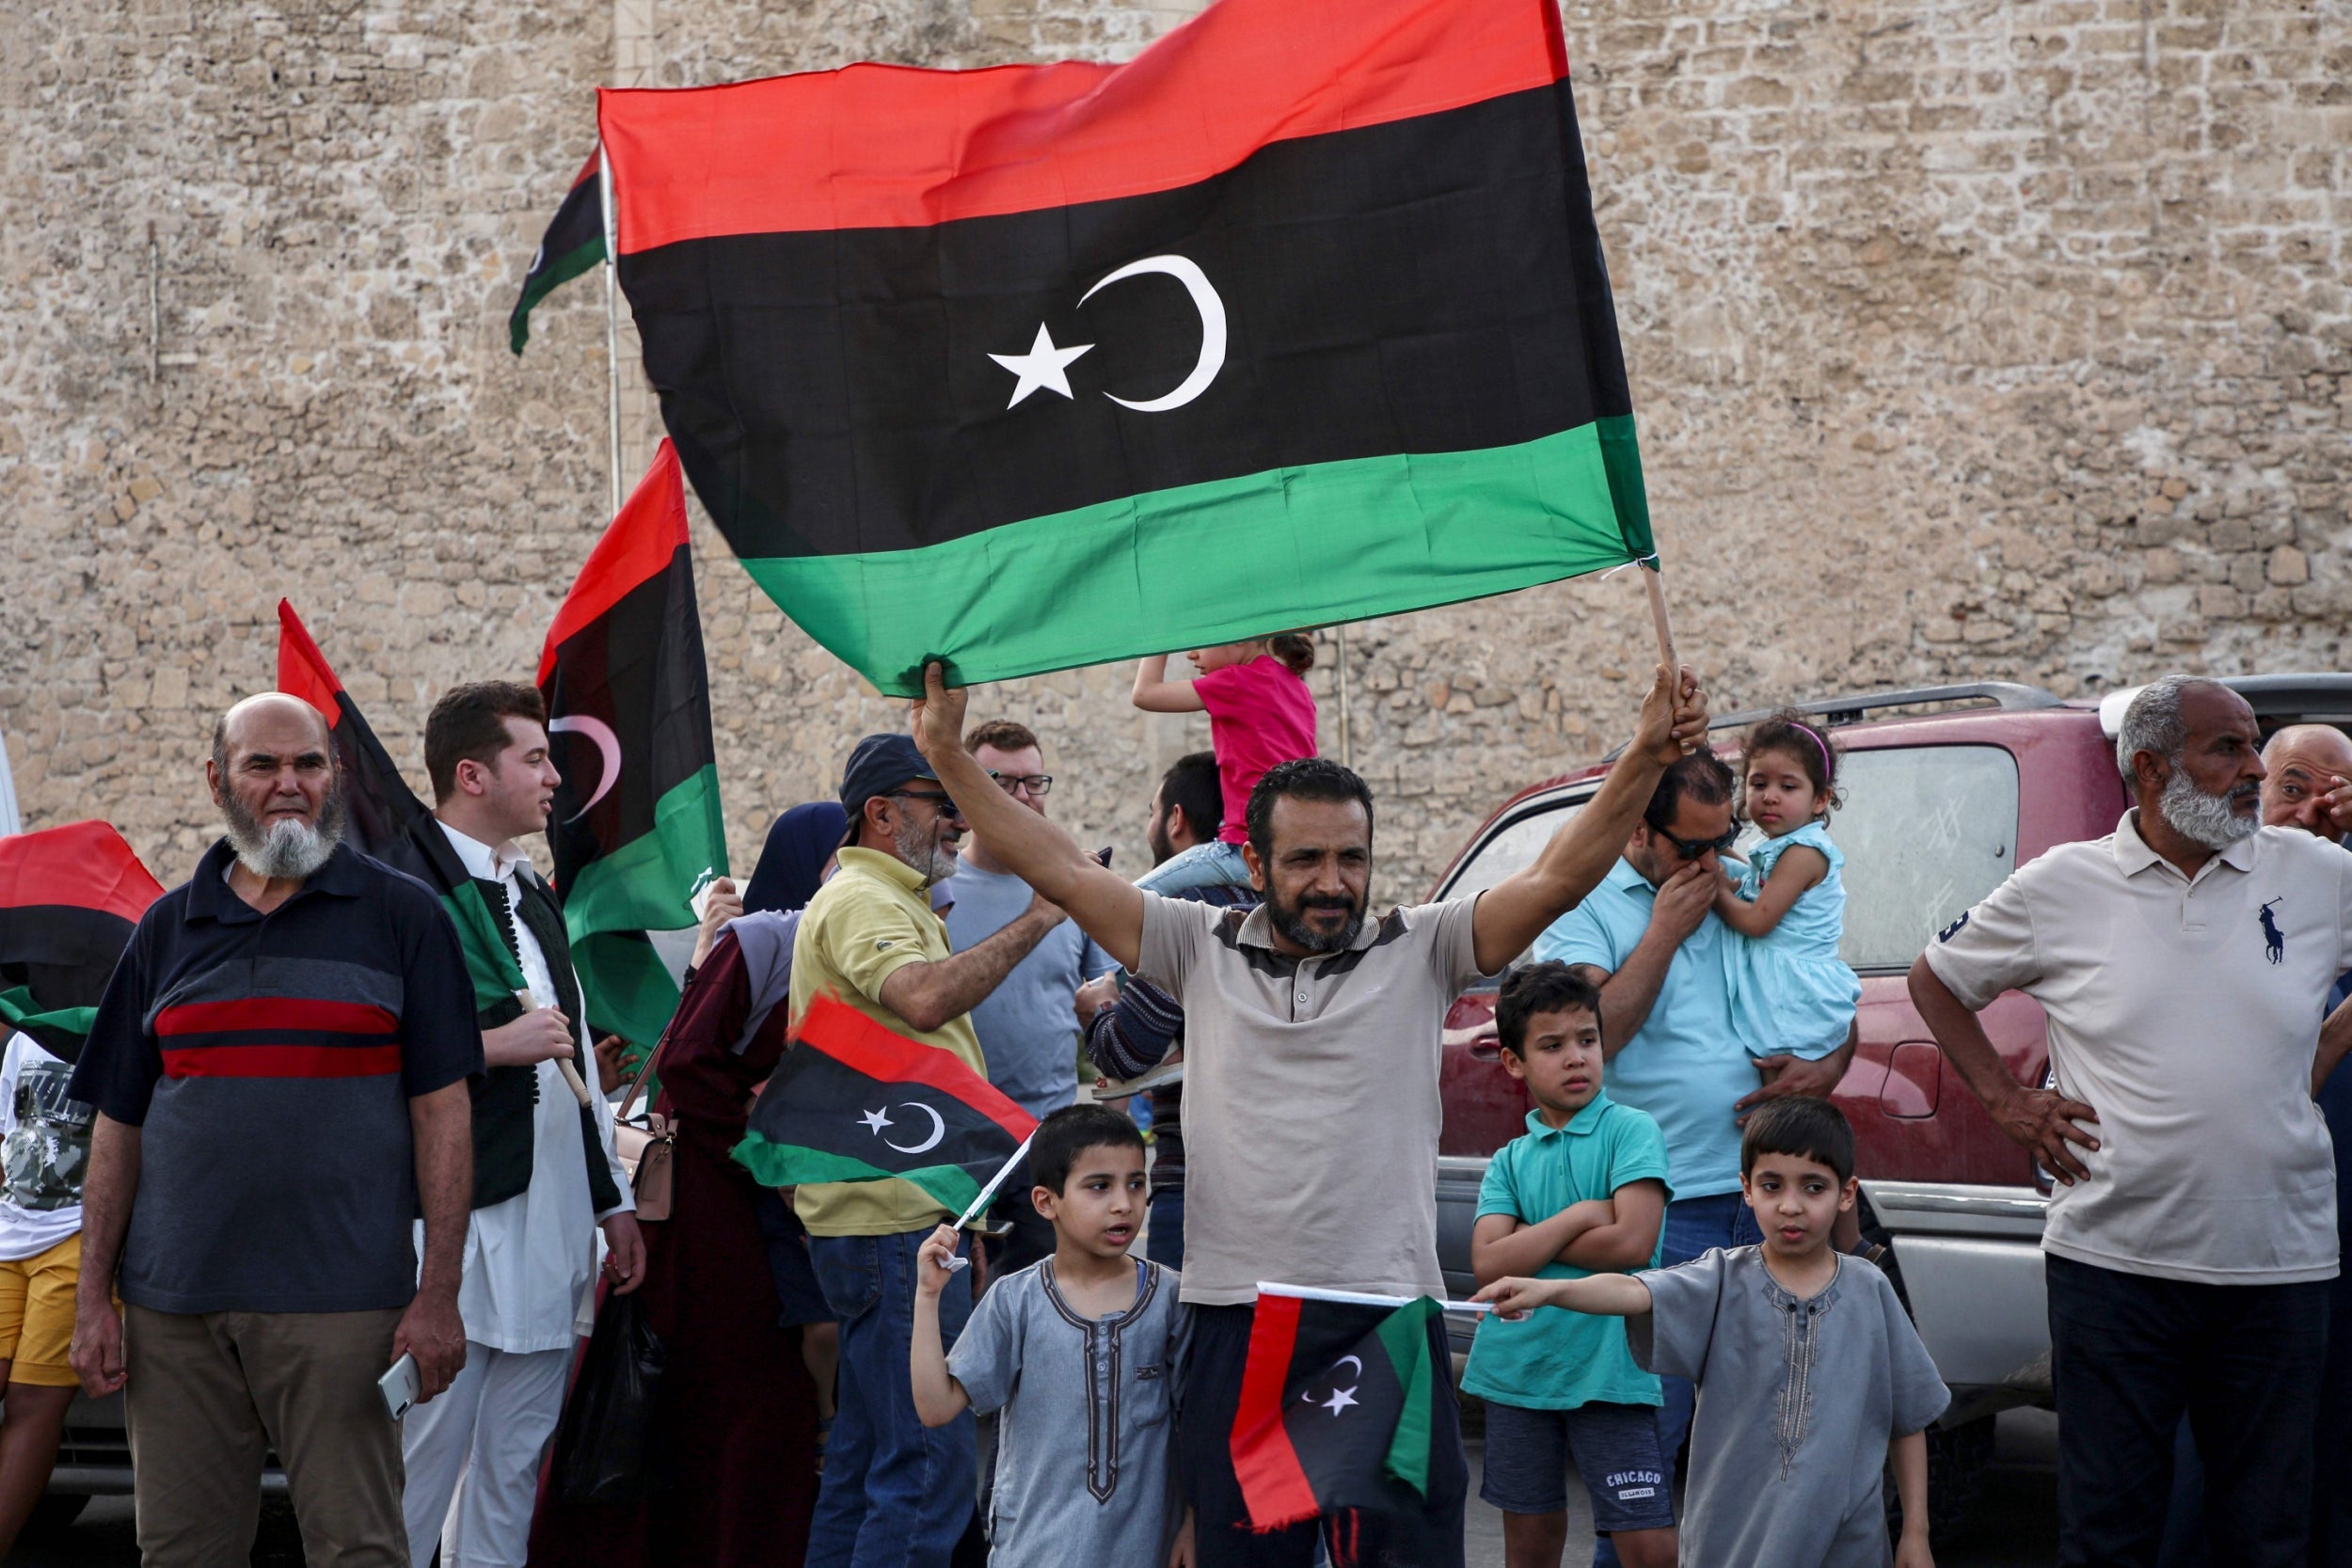 A man waves a Libyan flag in Tripoli in celebration of GNA victories this week